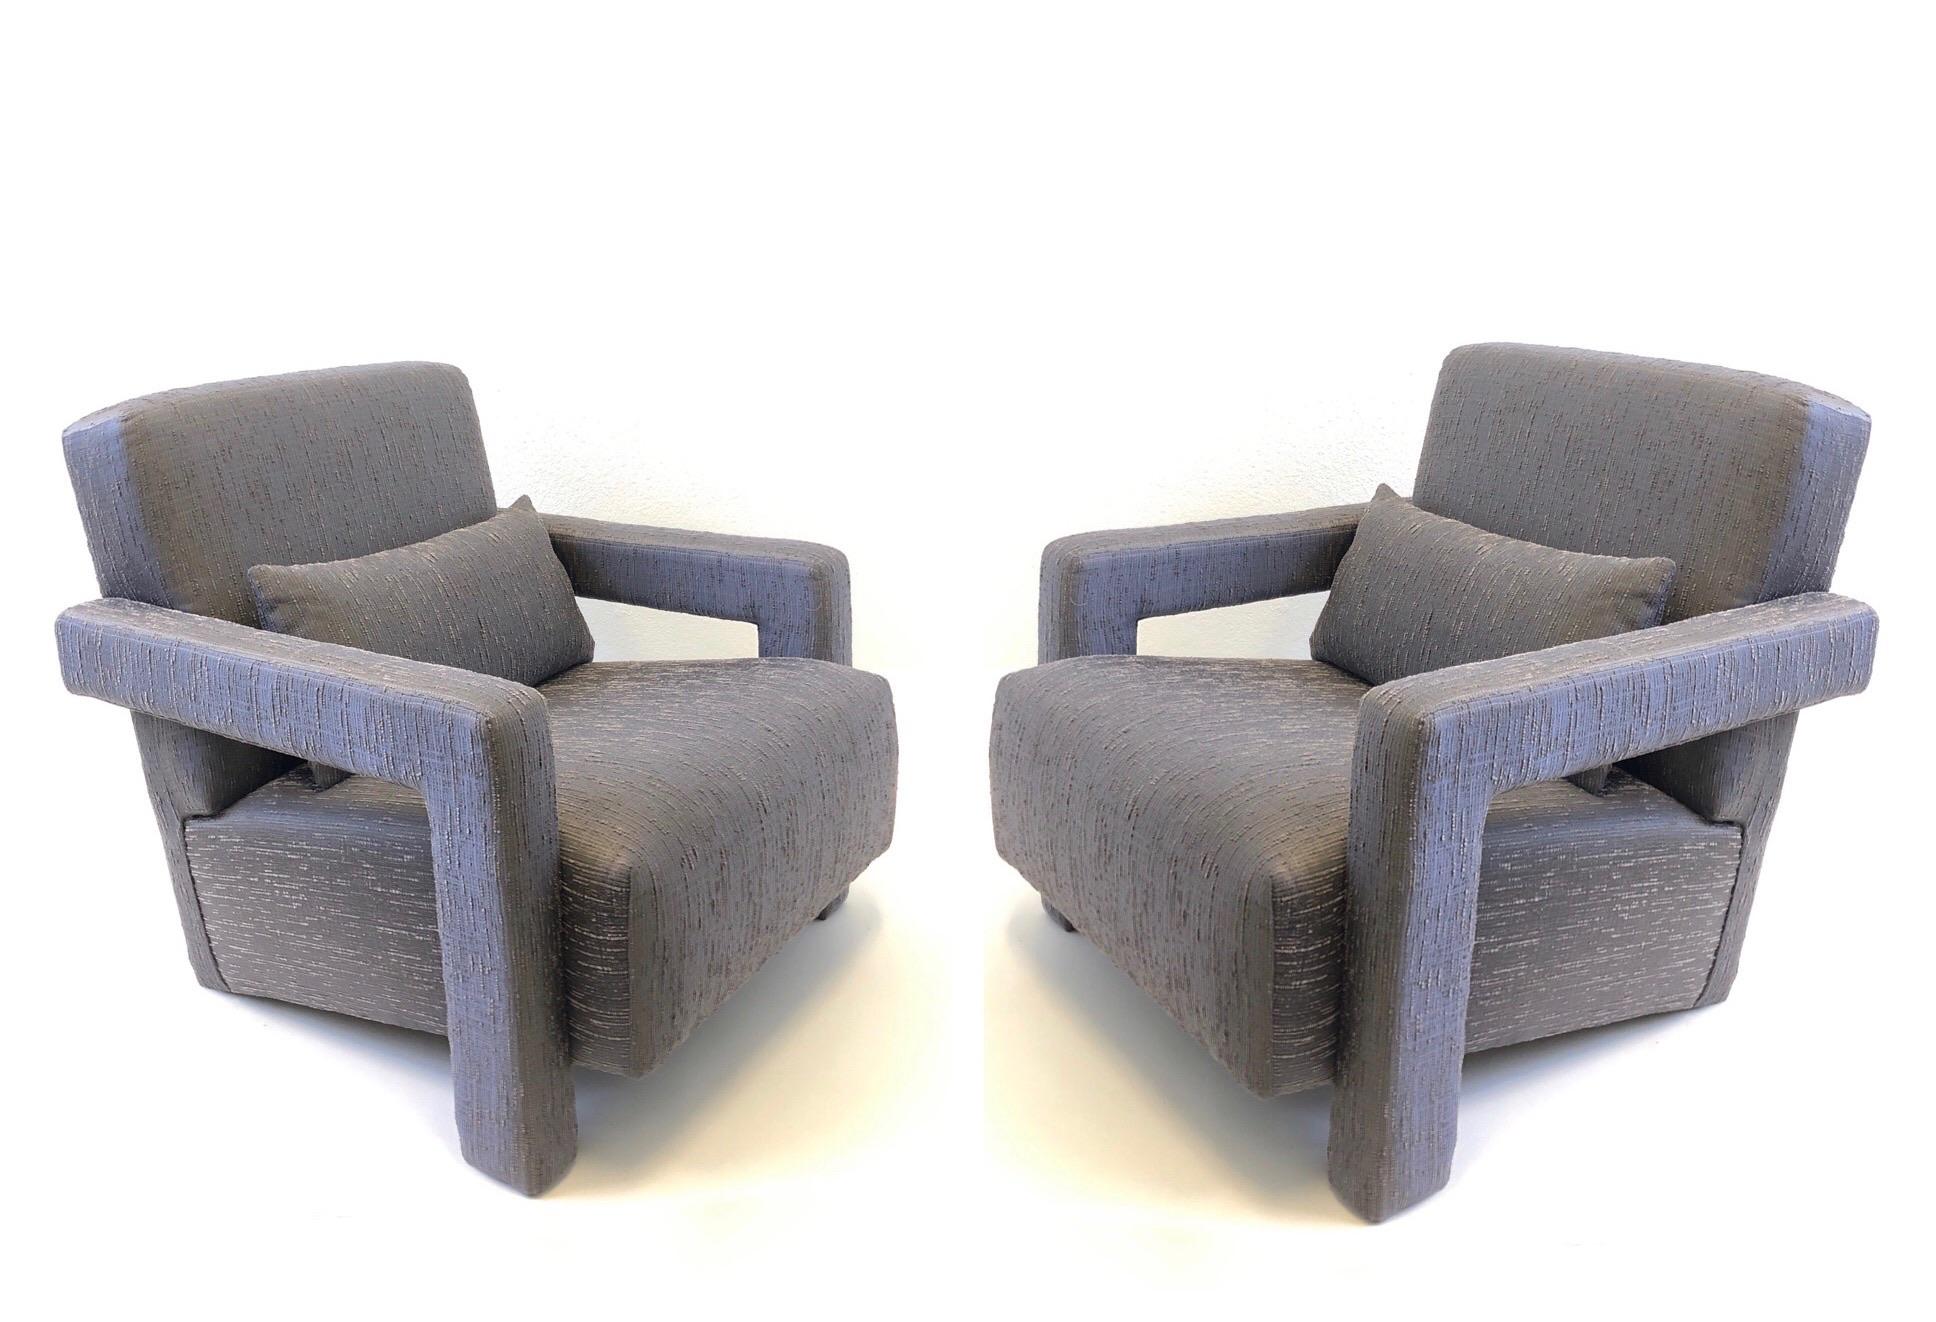 A spectacular pair of Utrecht lounge chairs designed by iconic Dutch Architect Gerrit Thomas Rietveld. The chairs have been recently recovered with a slate gray fabric (see detail photos). 
Measurements: 30” wide 33” deep 30” high 15” seat 20” arm.